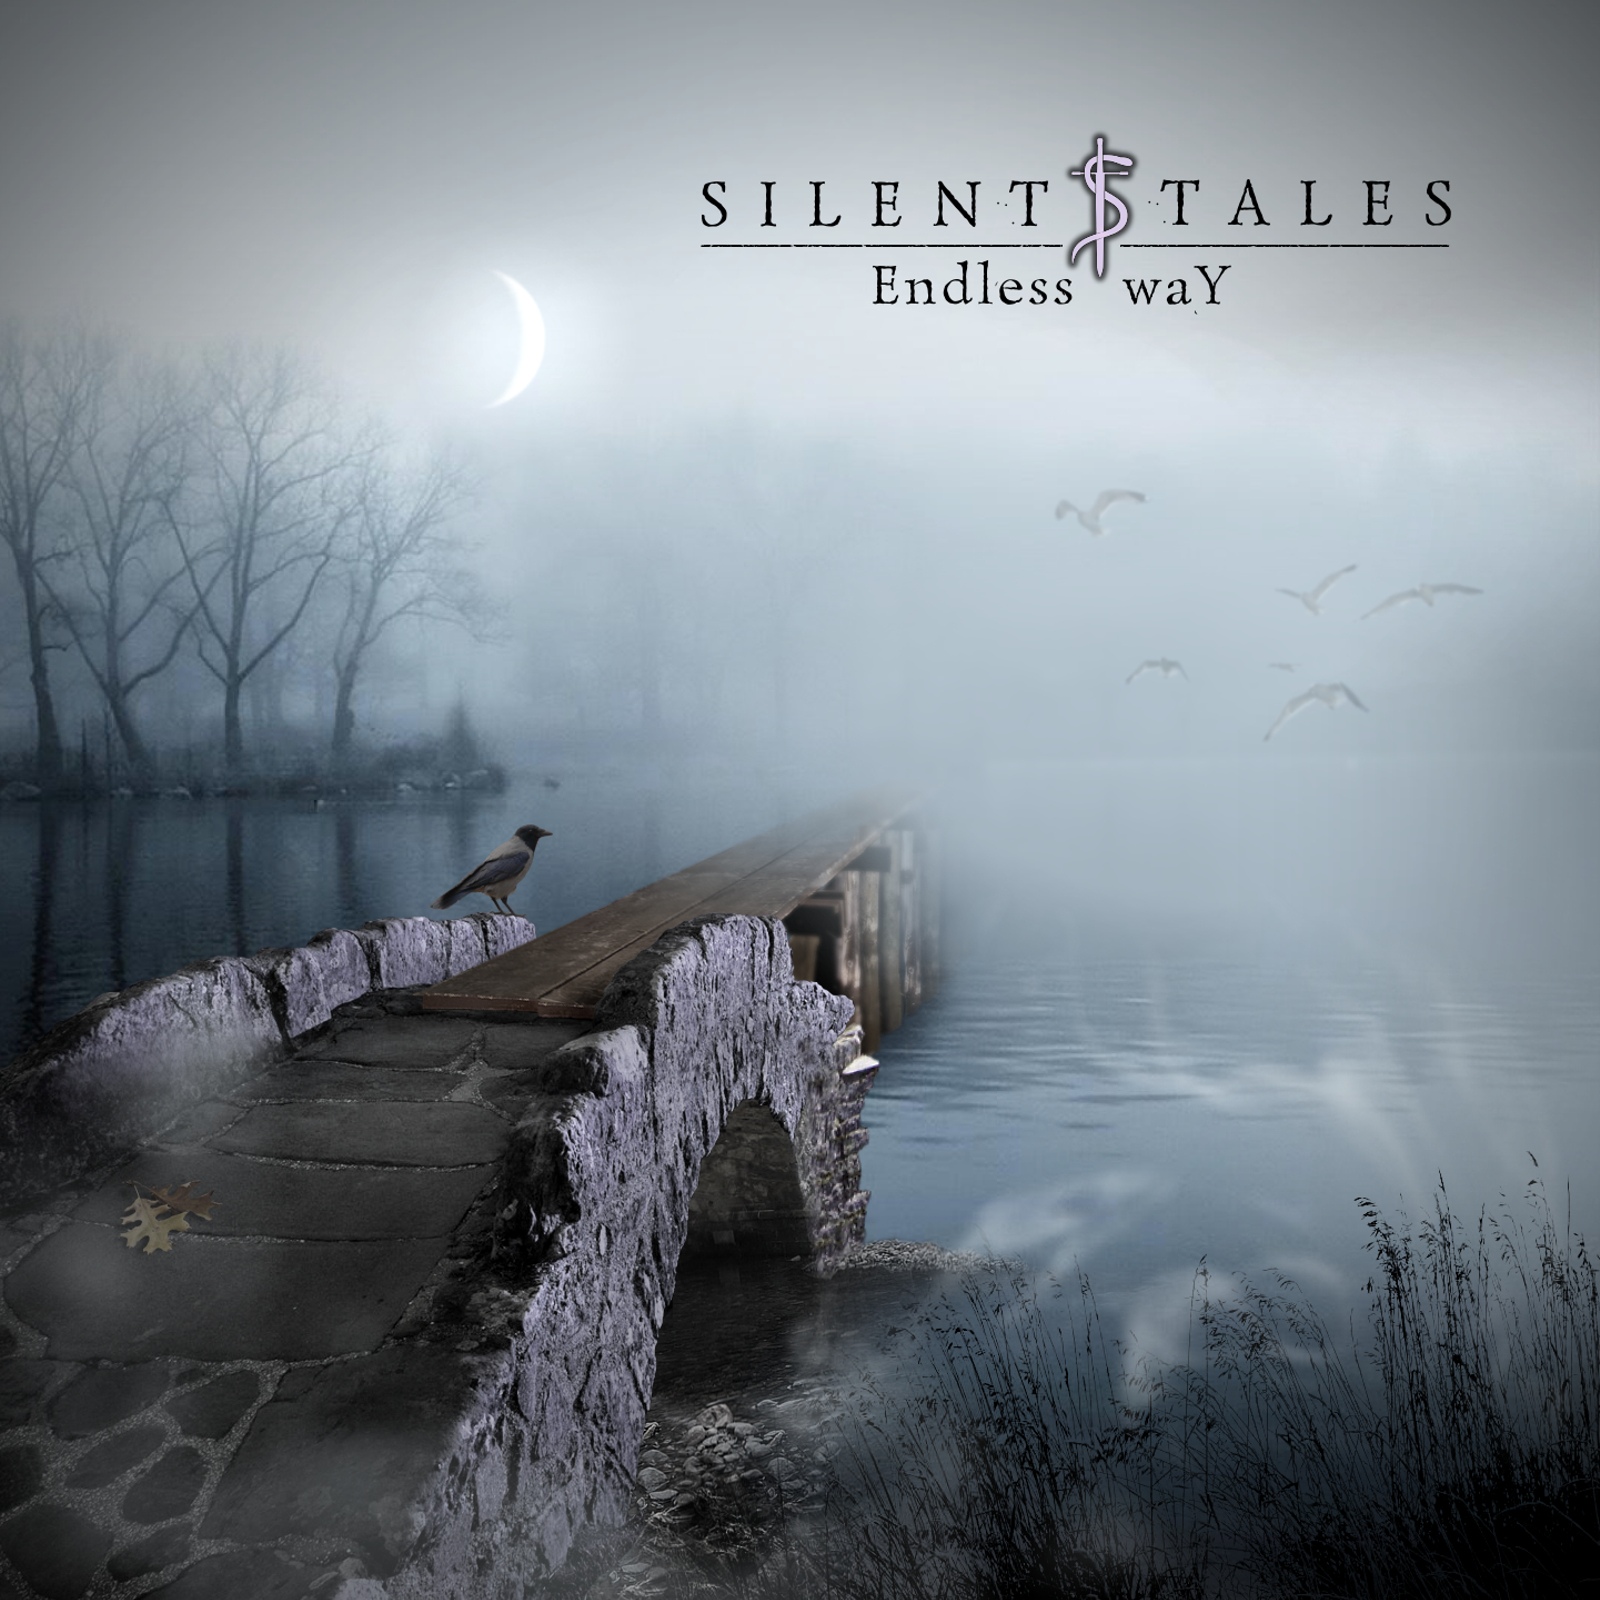 Silent Tales